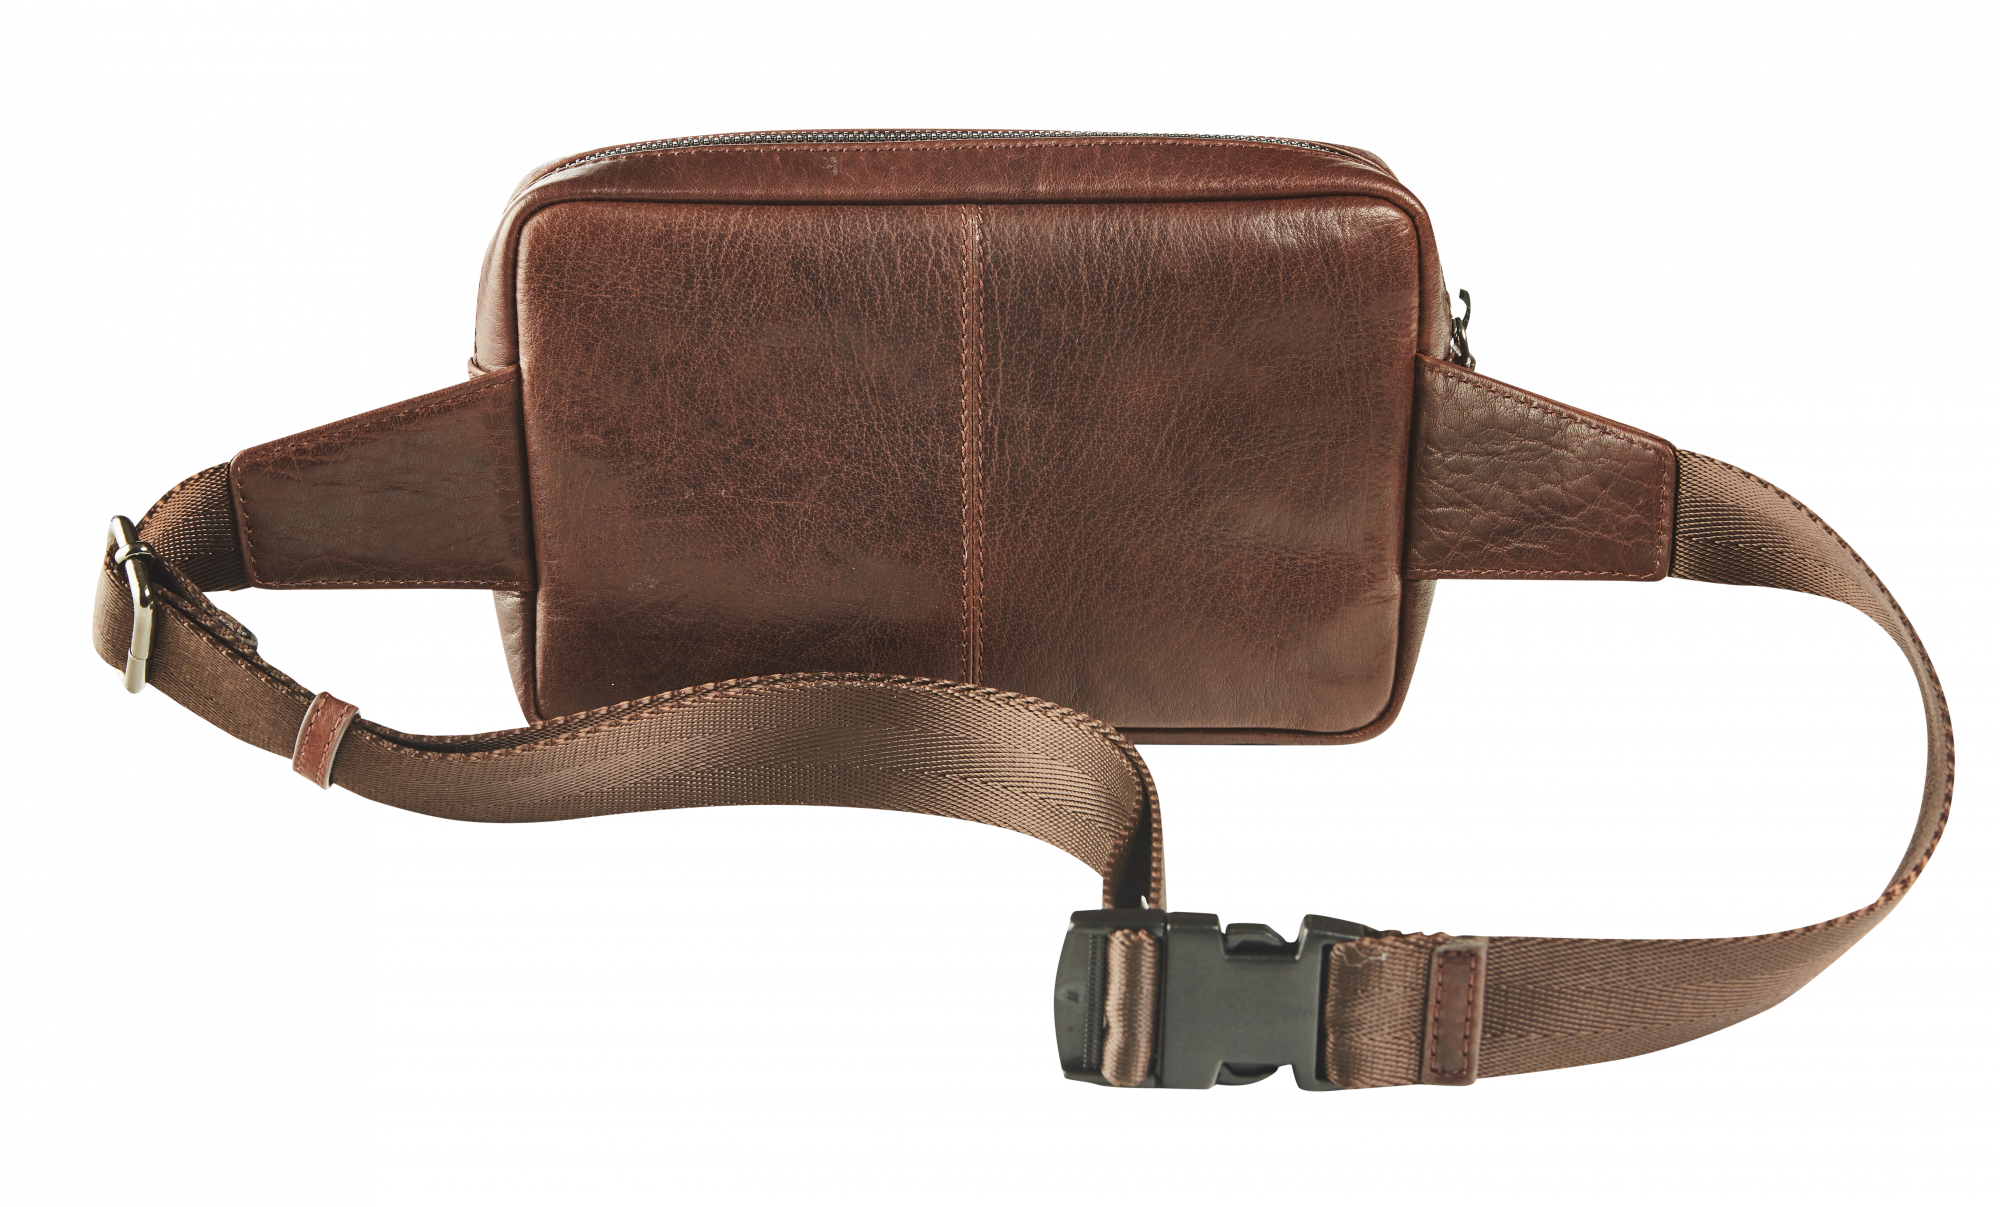 Productafbeelding Leather crossbody bag - brown